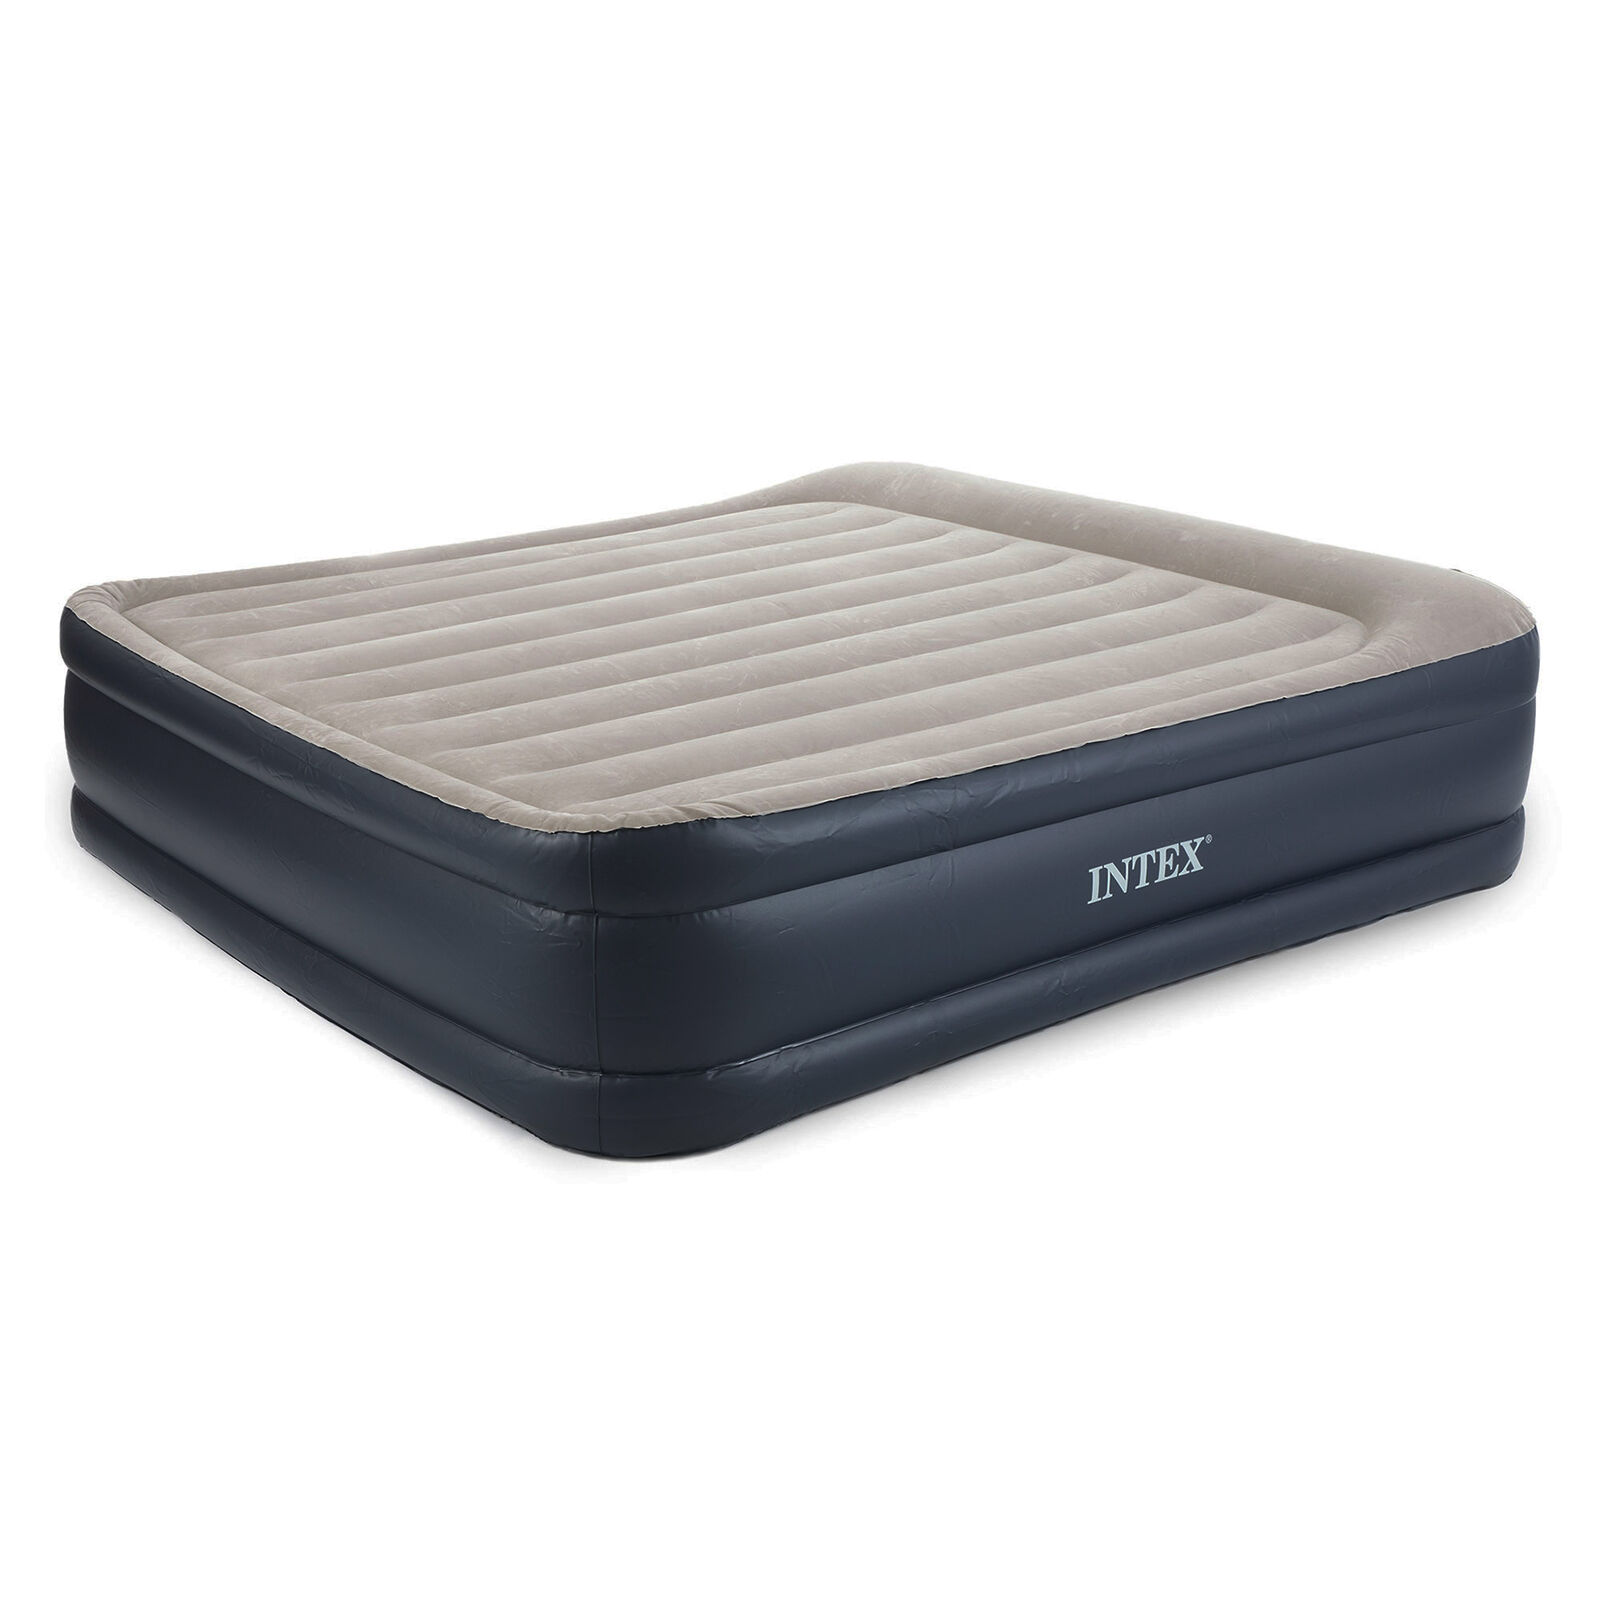 Intex Dura Beam Deluxe Raised Blow Up Air Mattress Bed with Built In Pump, King